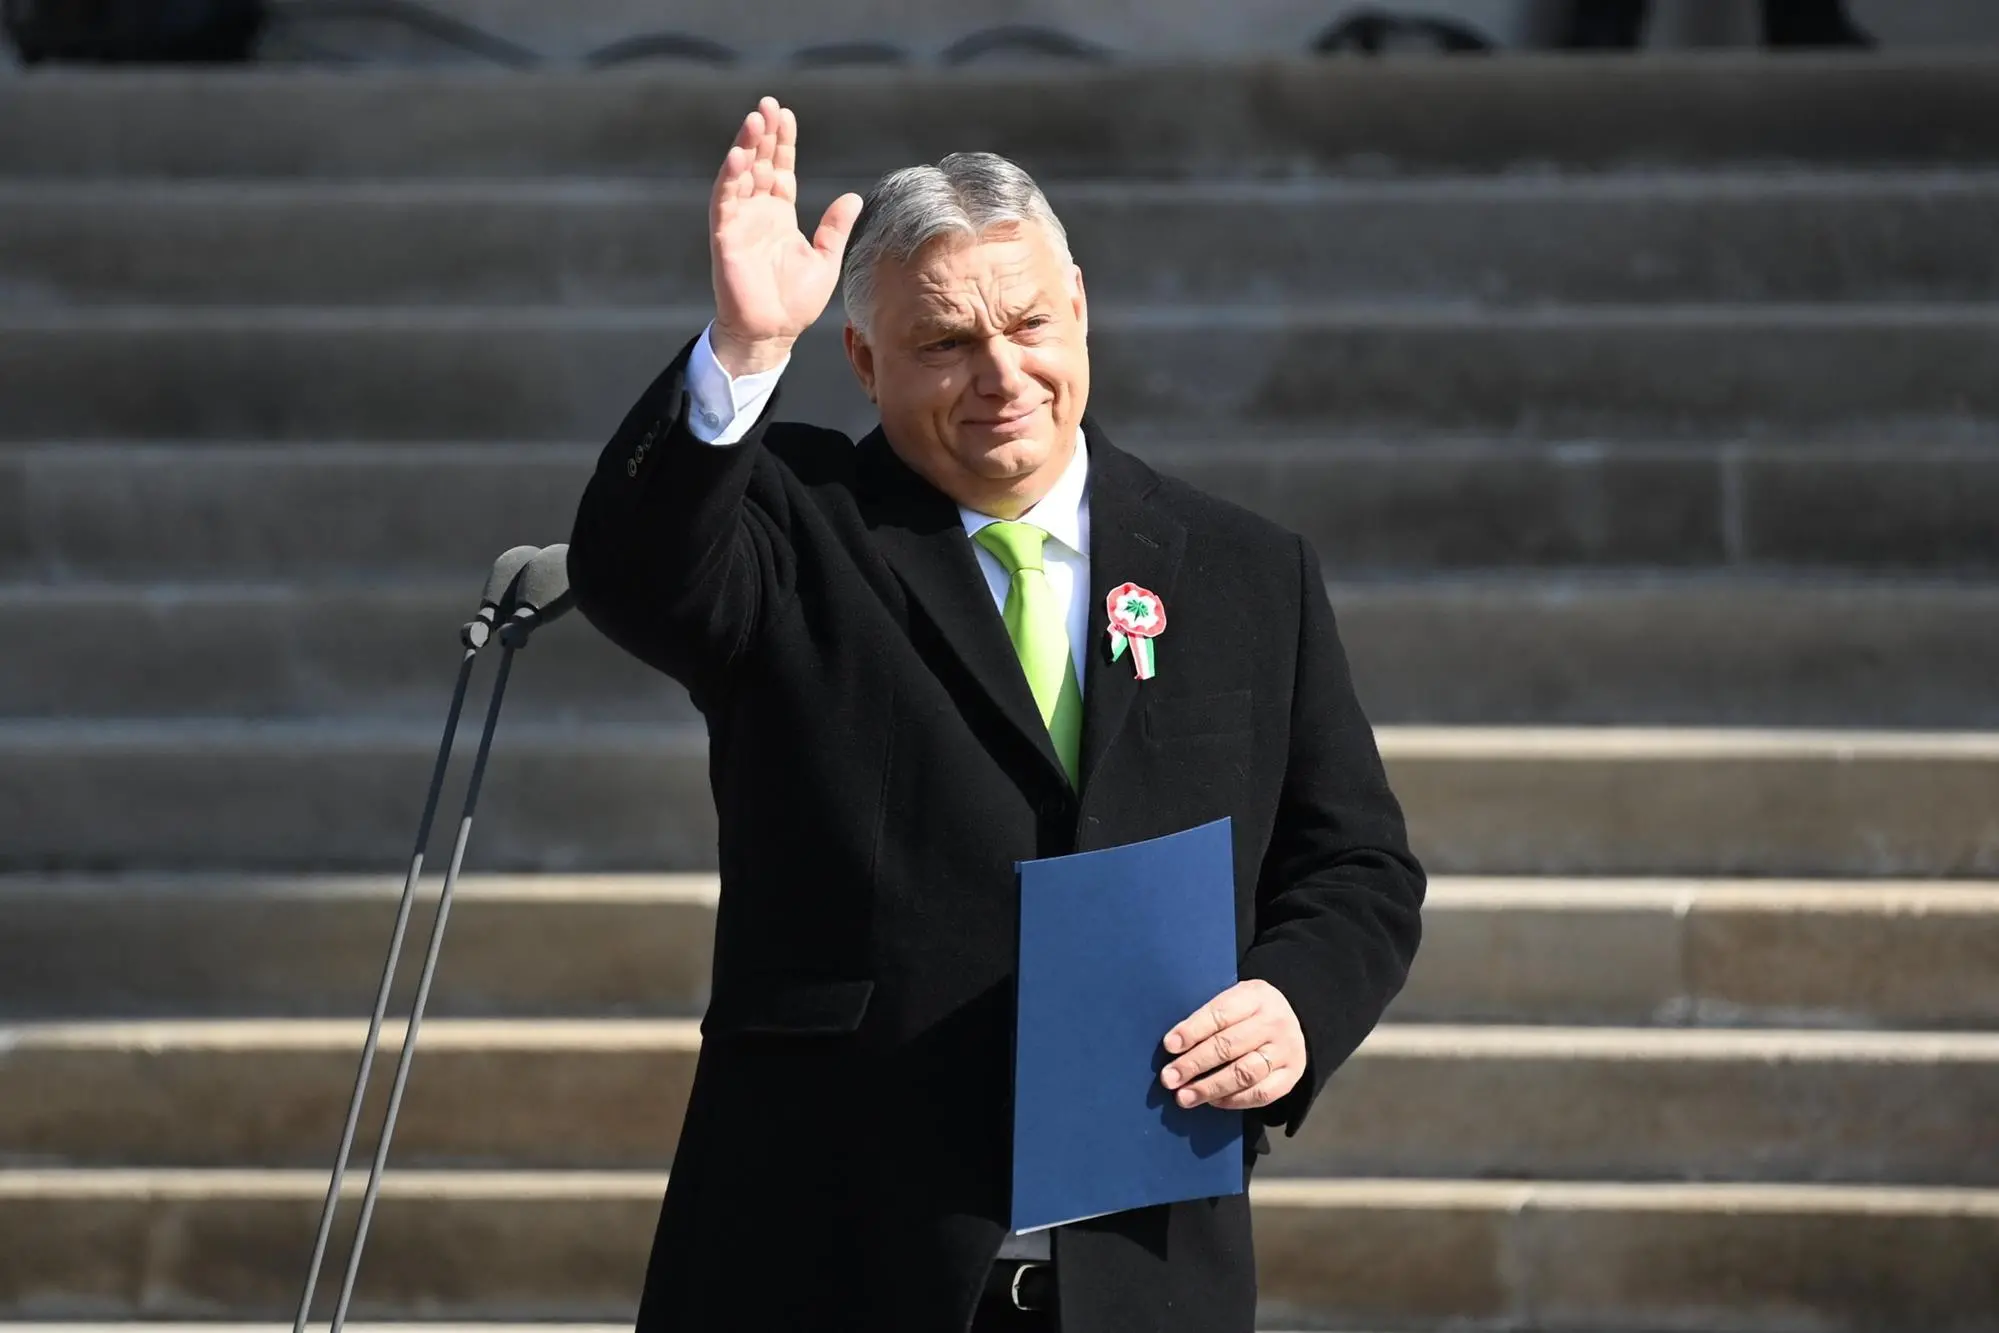 epa11221942 Hungarian Prime Minister Viktor Orban waves on the steps of the Hungarian National Museum during the official state ceremony to mark the 176th anniversary of the outbreak of the 1848 revolution and war of independence against Habsburg rule in Budapest, Hungary, 15 March 2024. EPA/ZOLTAN MATHE HUNGARY OUT